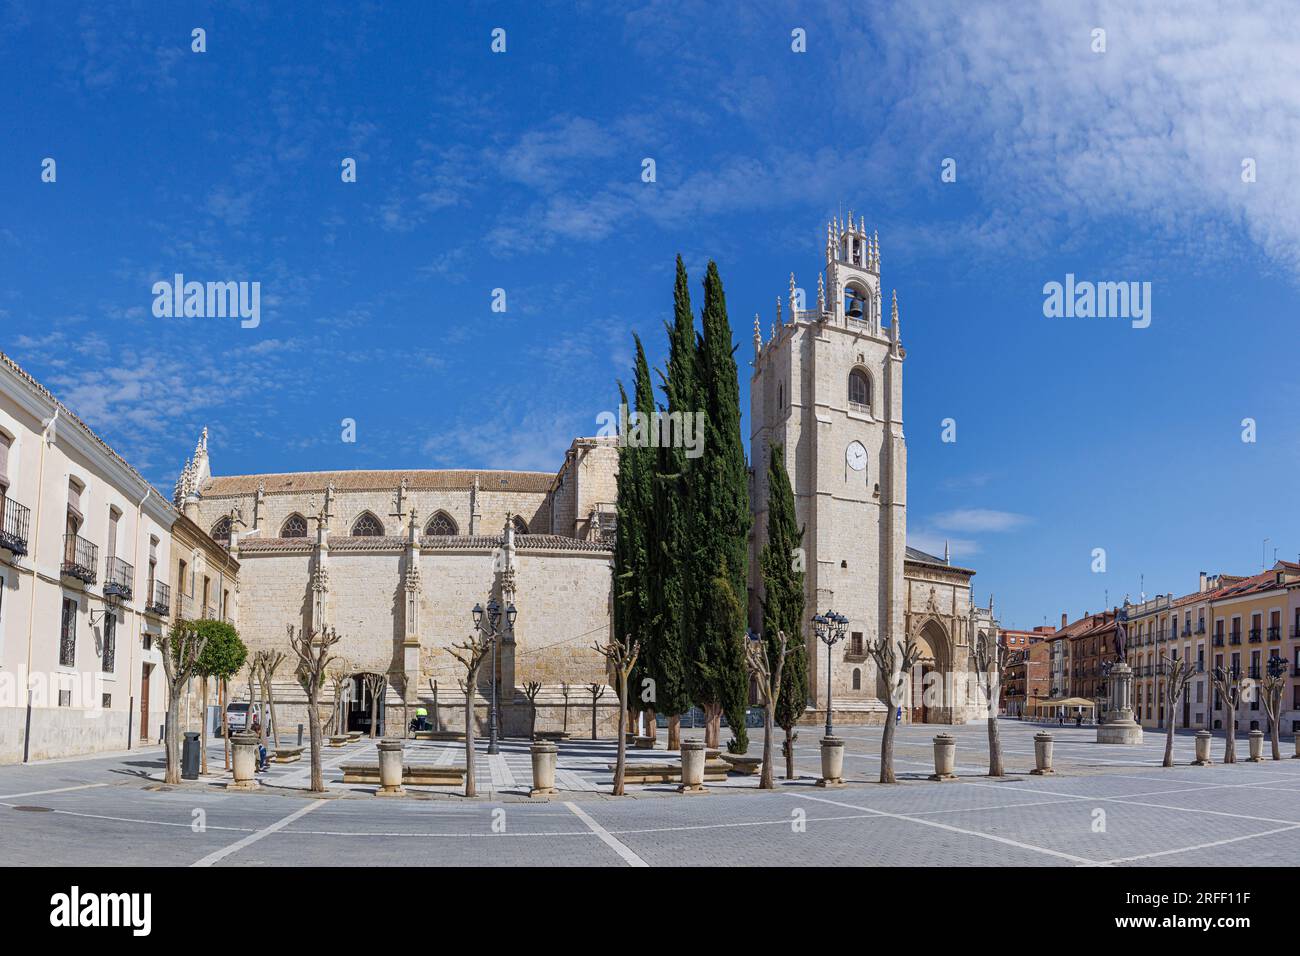 Spain, Castile and Leon, Palencia, San Antolin cathedral Stock Photo